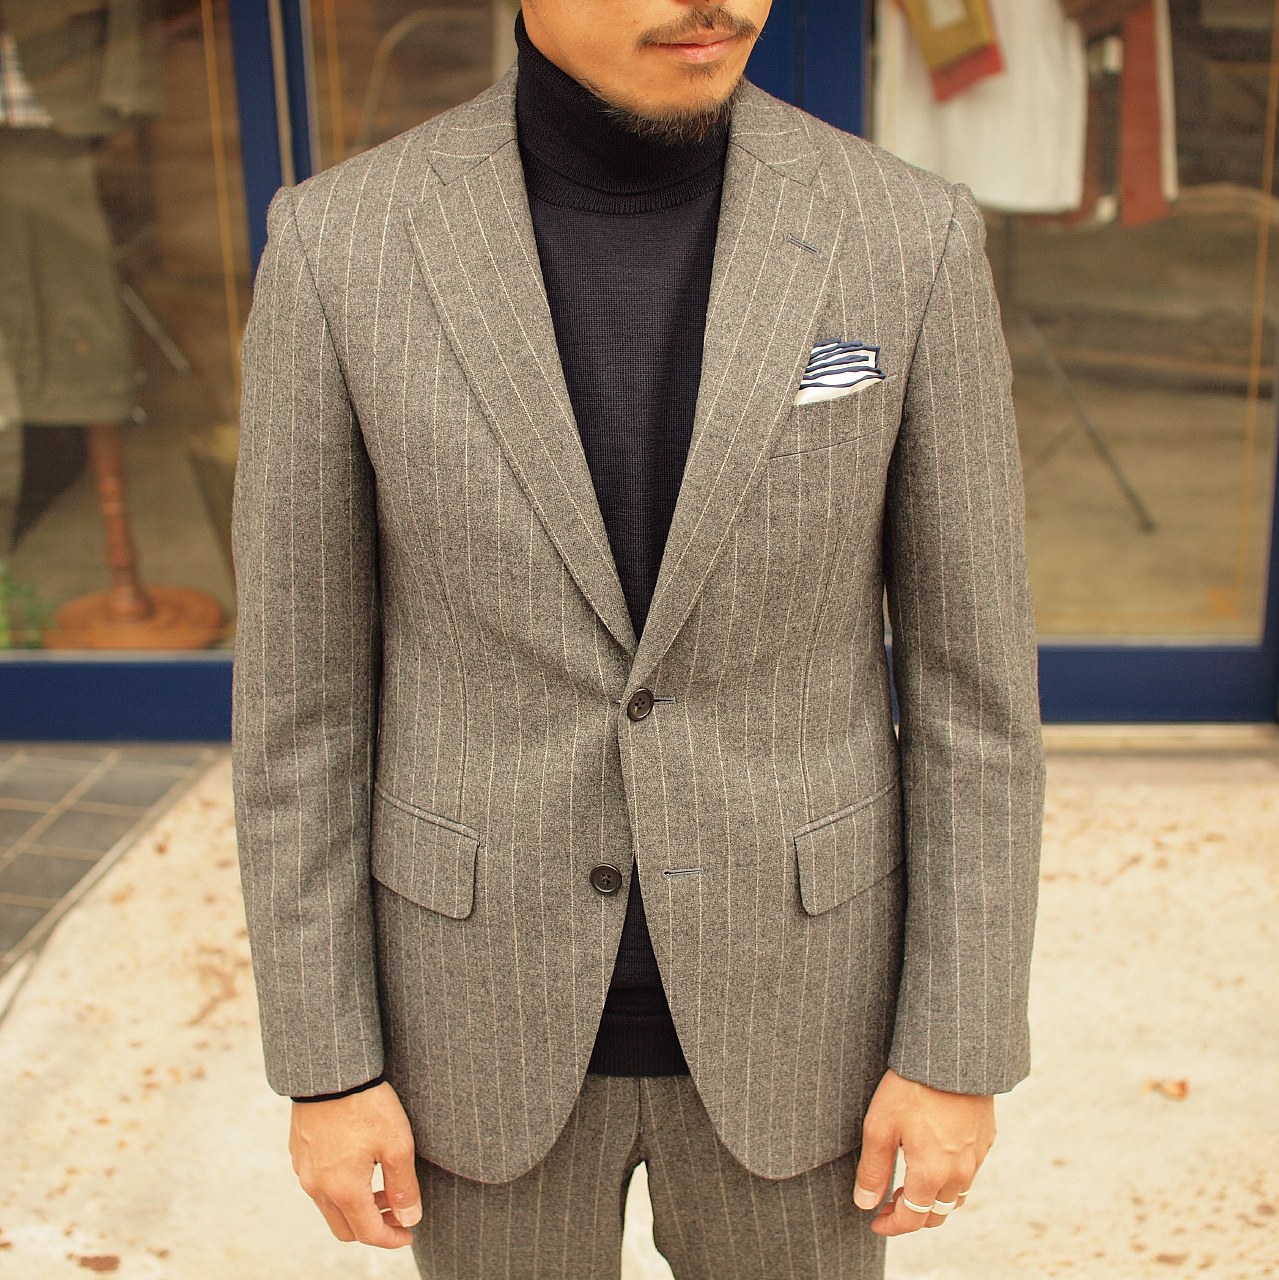 Surf and tailor moat シアサッカー セットアップ - スーツ